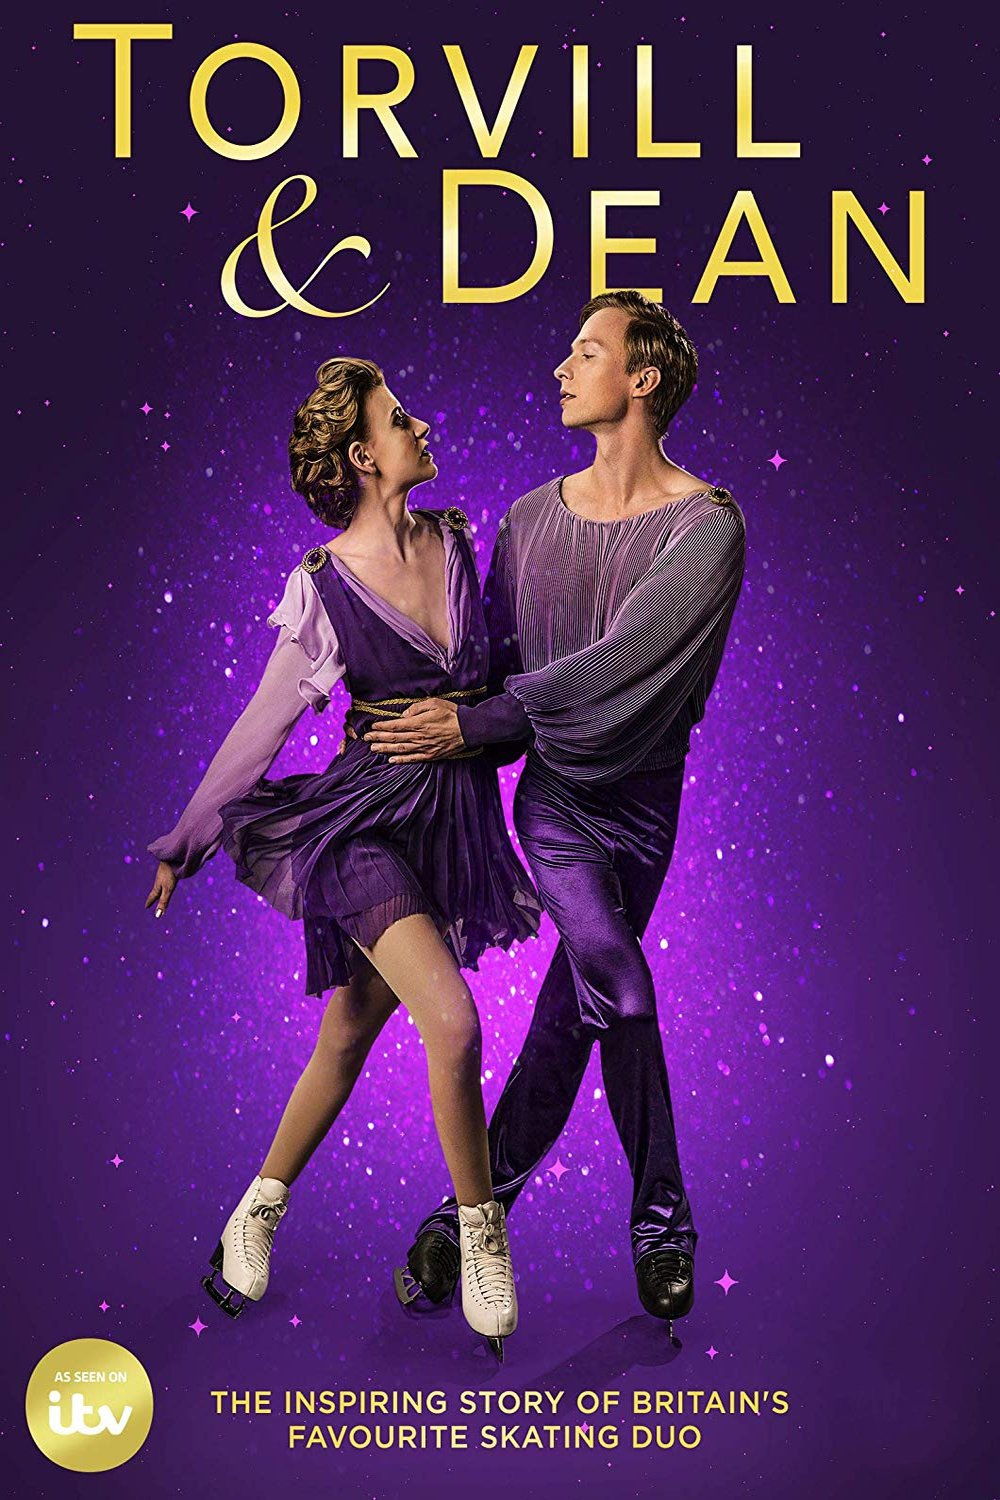 Poster of the movie Torvill & Dean